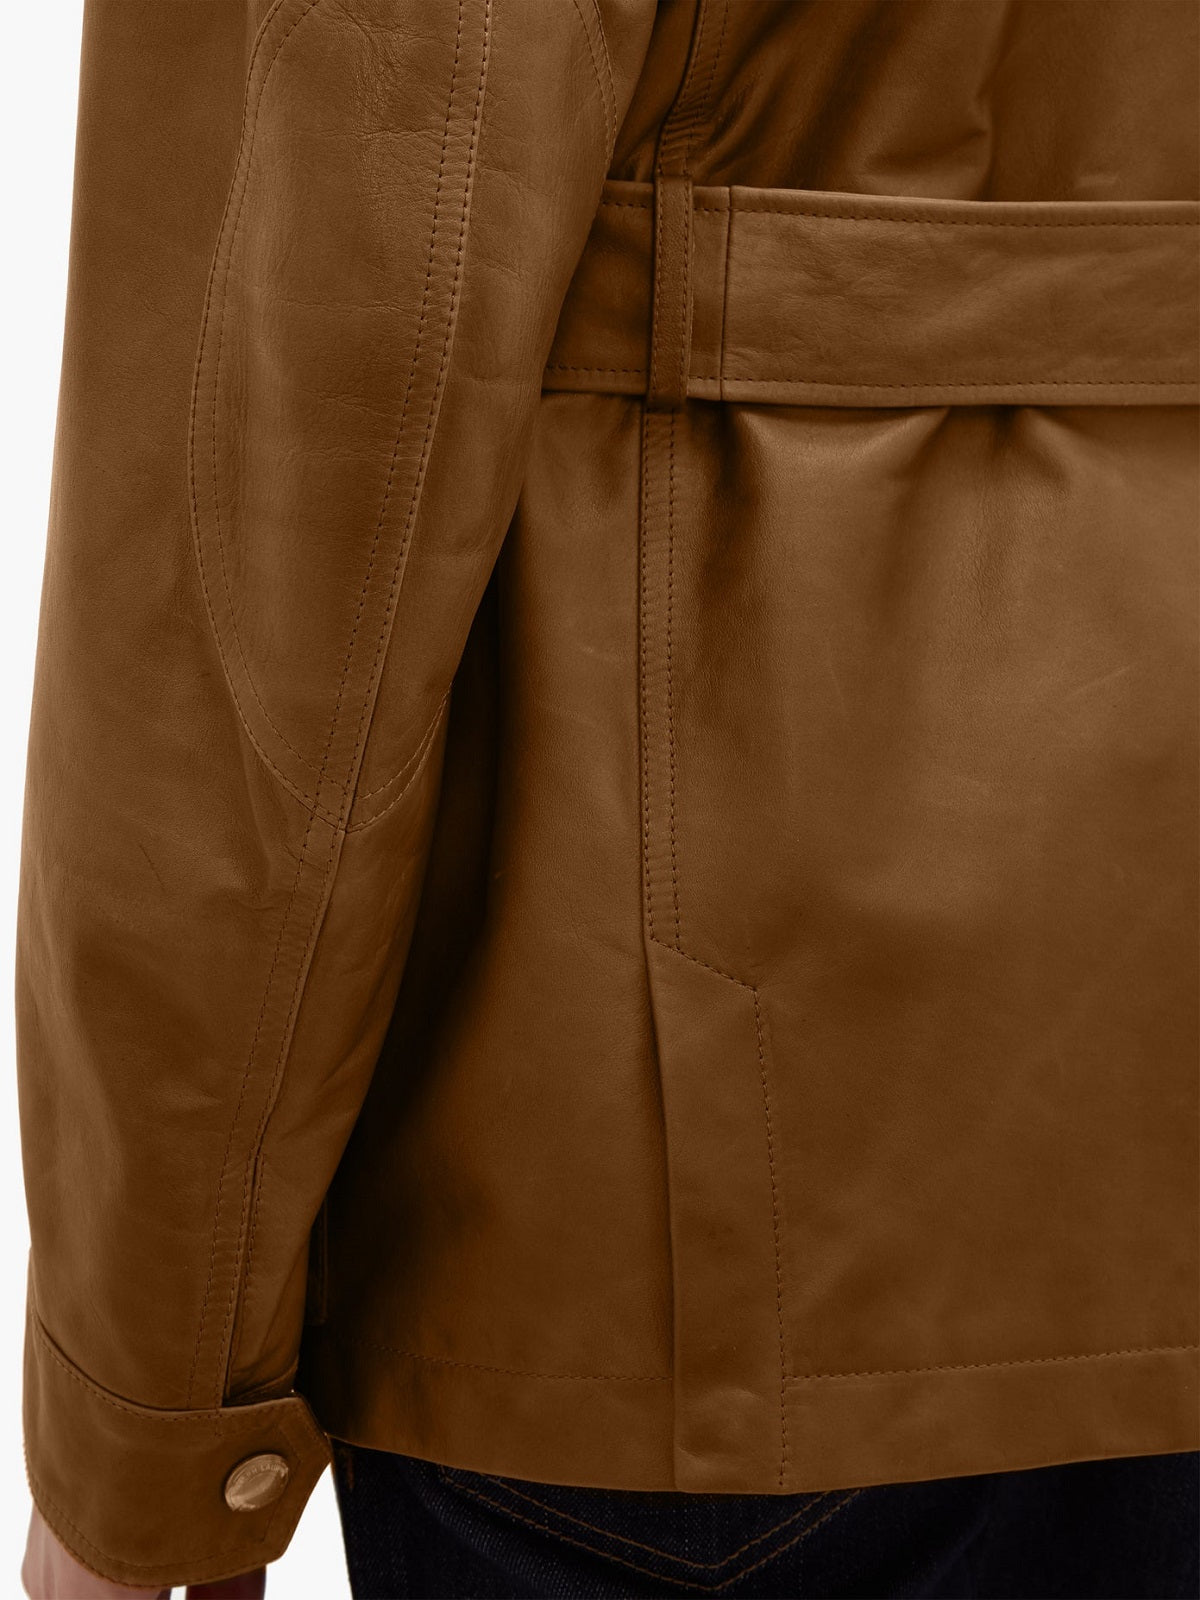 Men Brown Utility Leather Jacket - Leather Loom